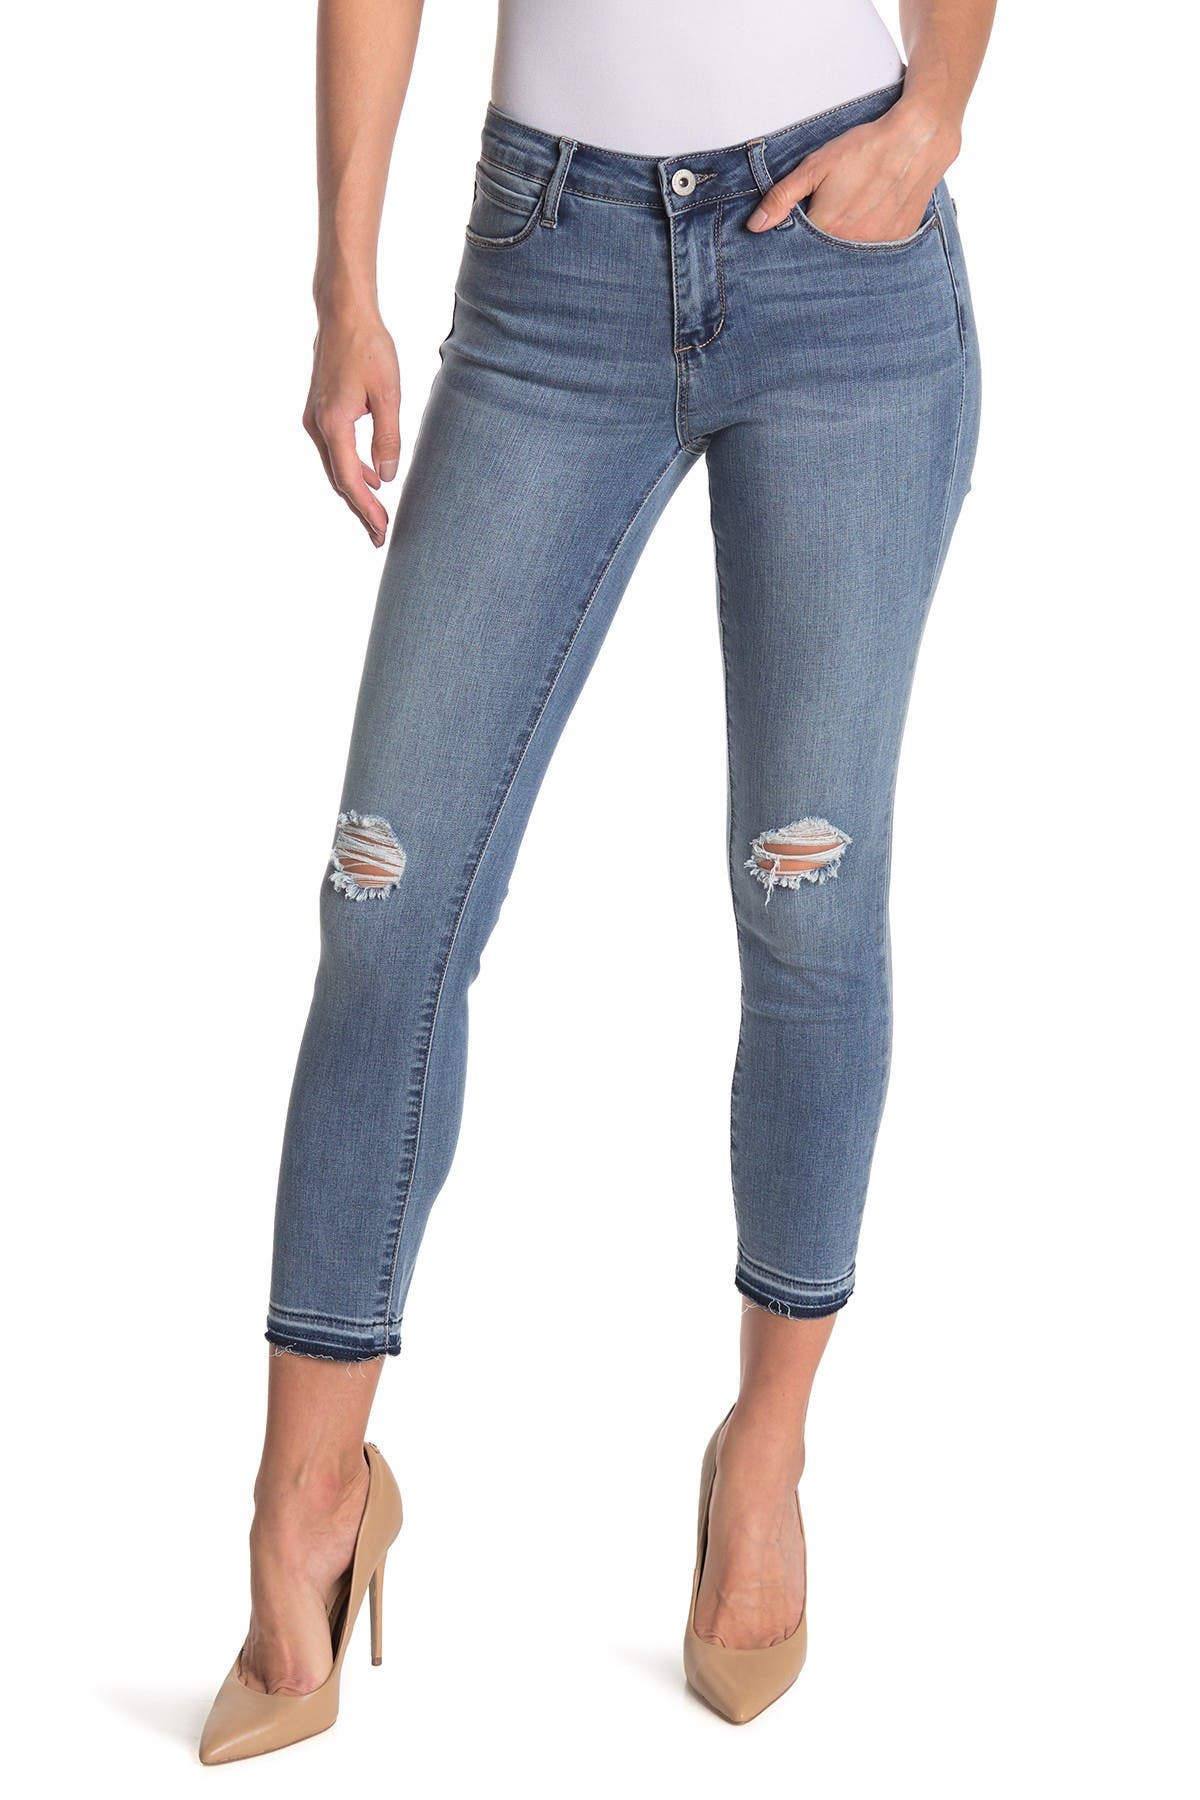 Articles Of Society Carly Cropped Jean In Medium Blue8